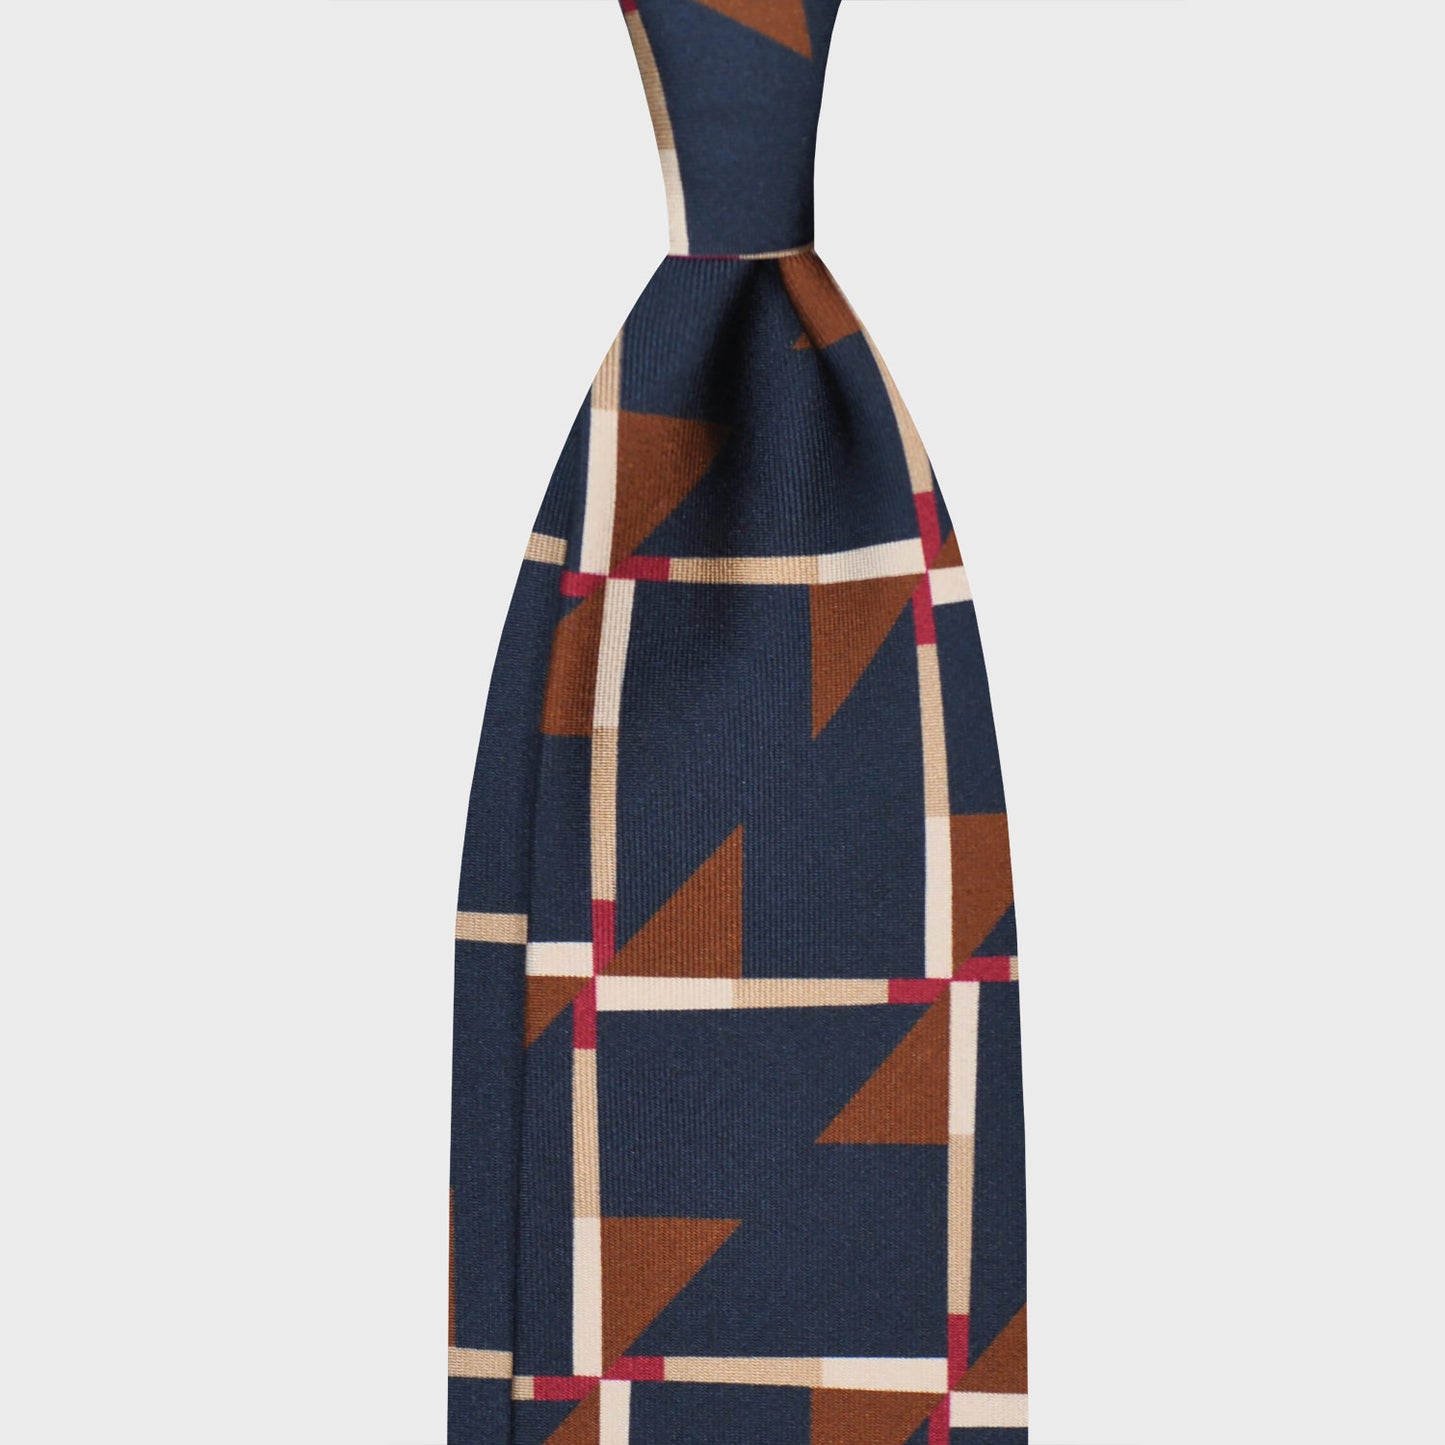 Cobalt Blue Art Decò Pattern Silk Tie. Refined deco tie made with finest Italian silk soft to the touch, cobalt blue background with caramel brown and red Art Decò pattern, unlined tie 3 folds, this Art Deco ties is made with a exclusive pattern made by Wools Boutique Uomo